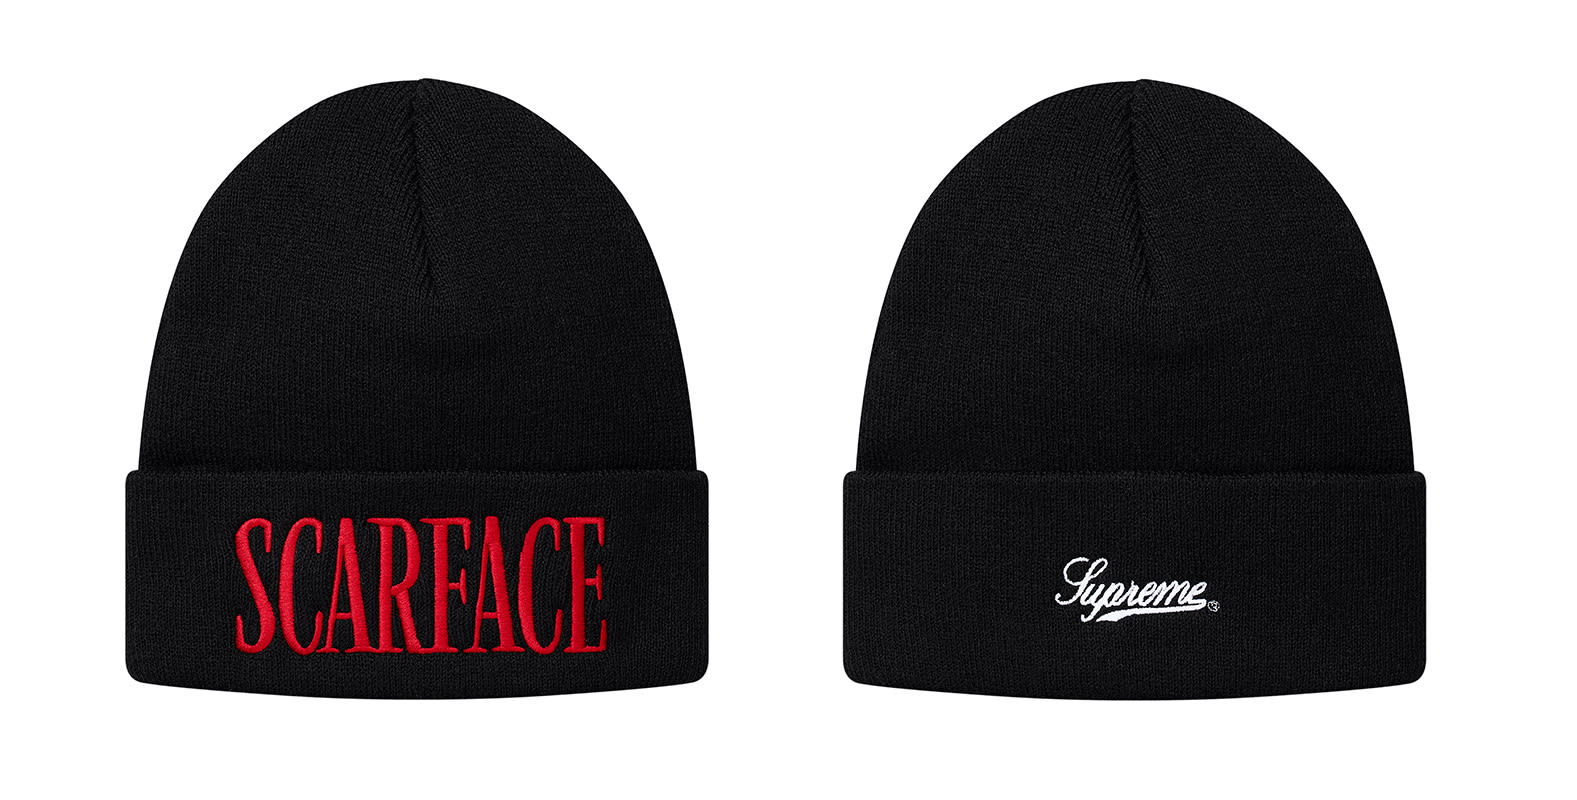 Supreme's 'Scarface' Collection Brings the Cocaine Classic ...